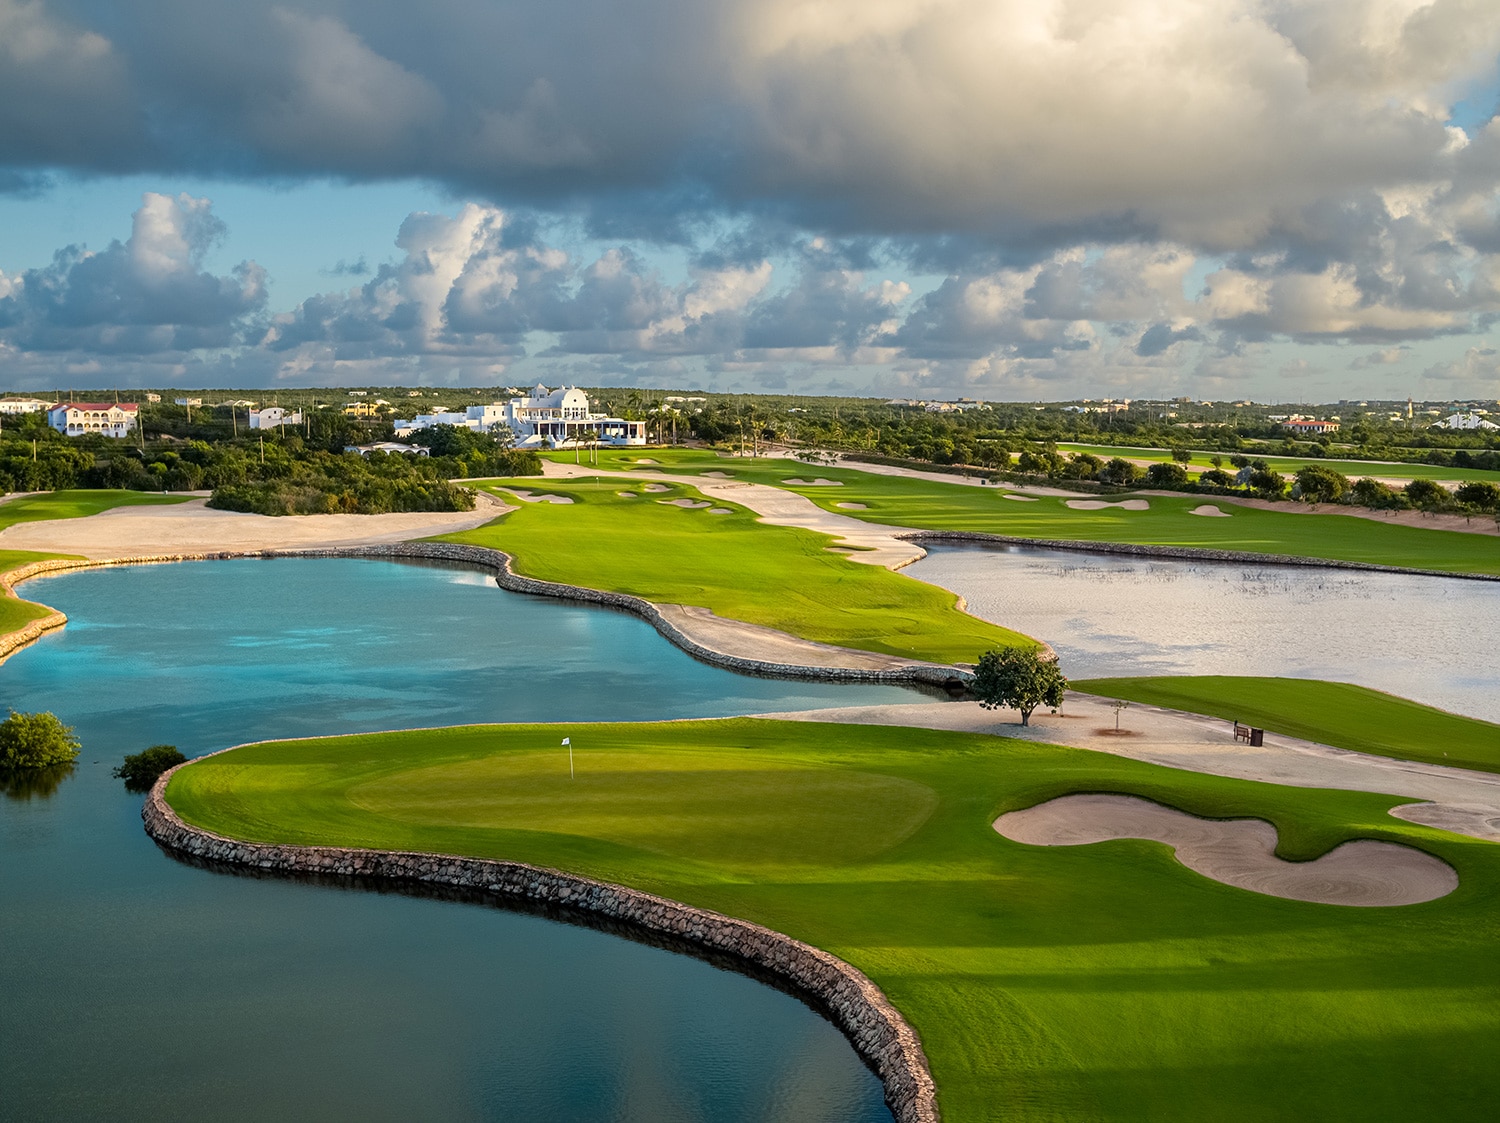 The 17th hole of the International Course at Aurora Anguilla Golf Resort and Spa.